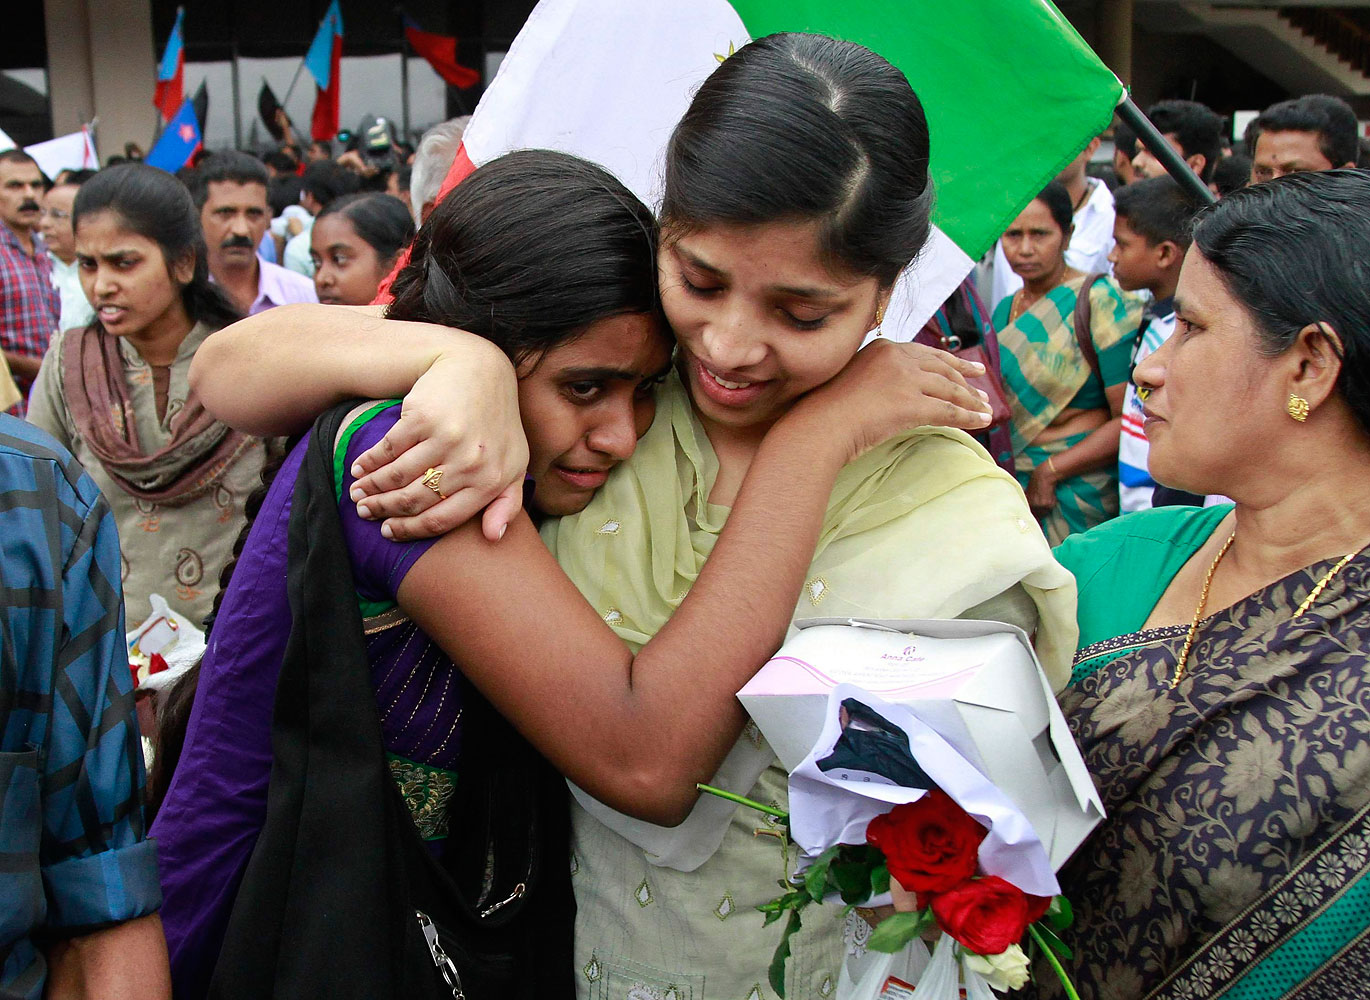 Sherin, center, an Indian nurse caught up in fighting in Iraq, hugs her sister after arriving at the airport in the southern Indian city of Kochi, July 5, 2014. (Sivaram V—Reuters)